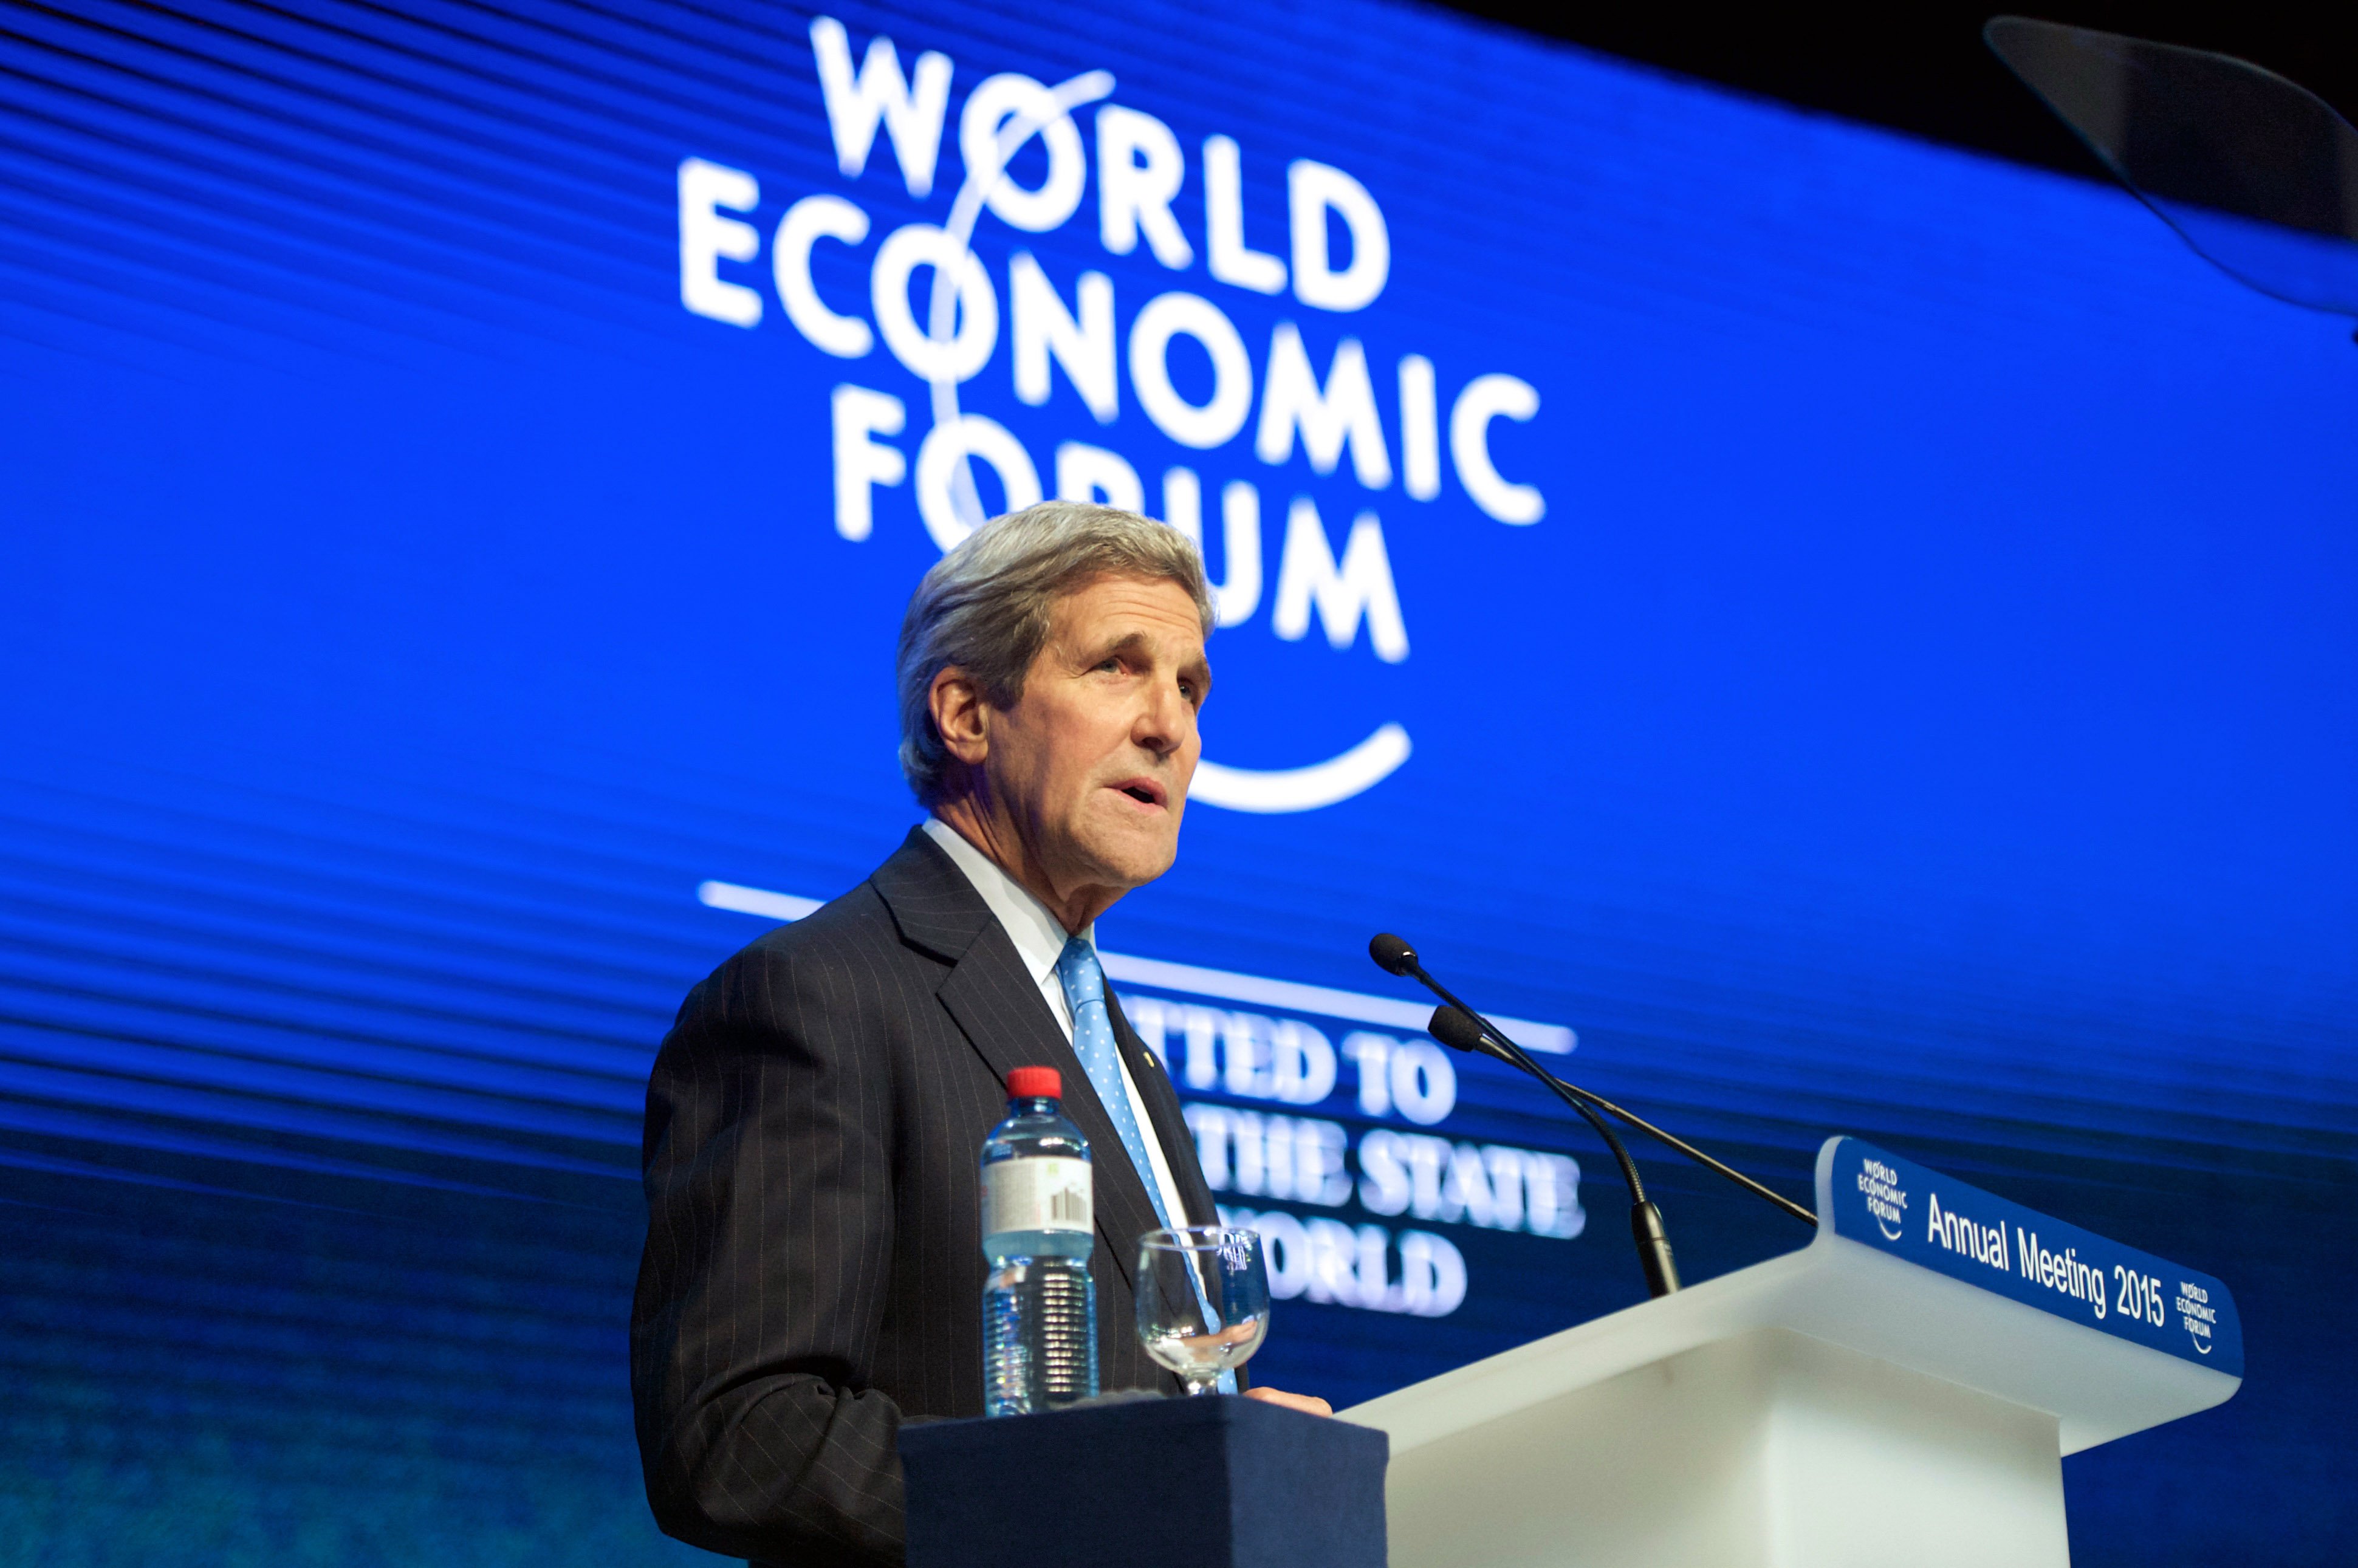 Secretary of State John Kerry delivers a speech about violent extremism to the audience at the World Economic Forum in Davos, Switzerland on Jan. 23, 2015.